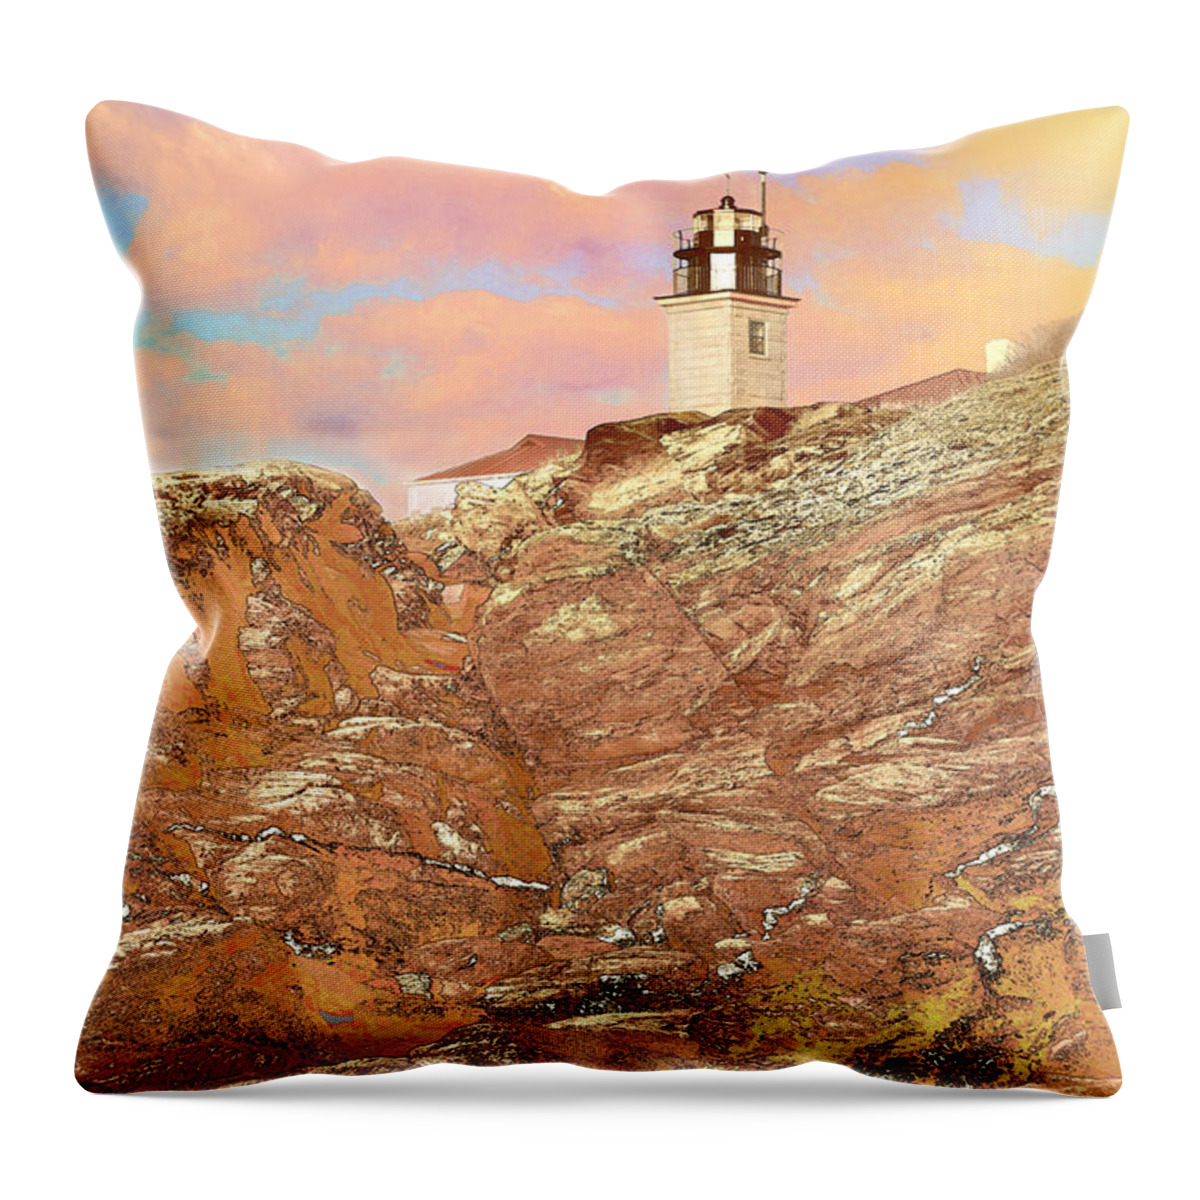 Lighthouse Throw Pillow featuring the photograph Beavertail Looking Surreal by Jerry Nettik